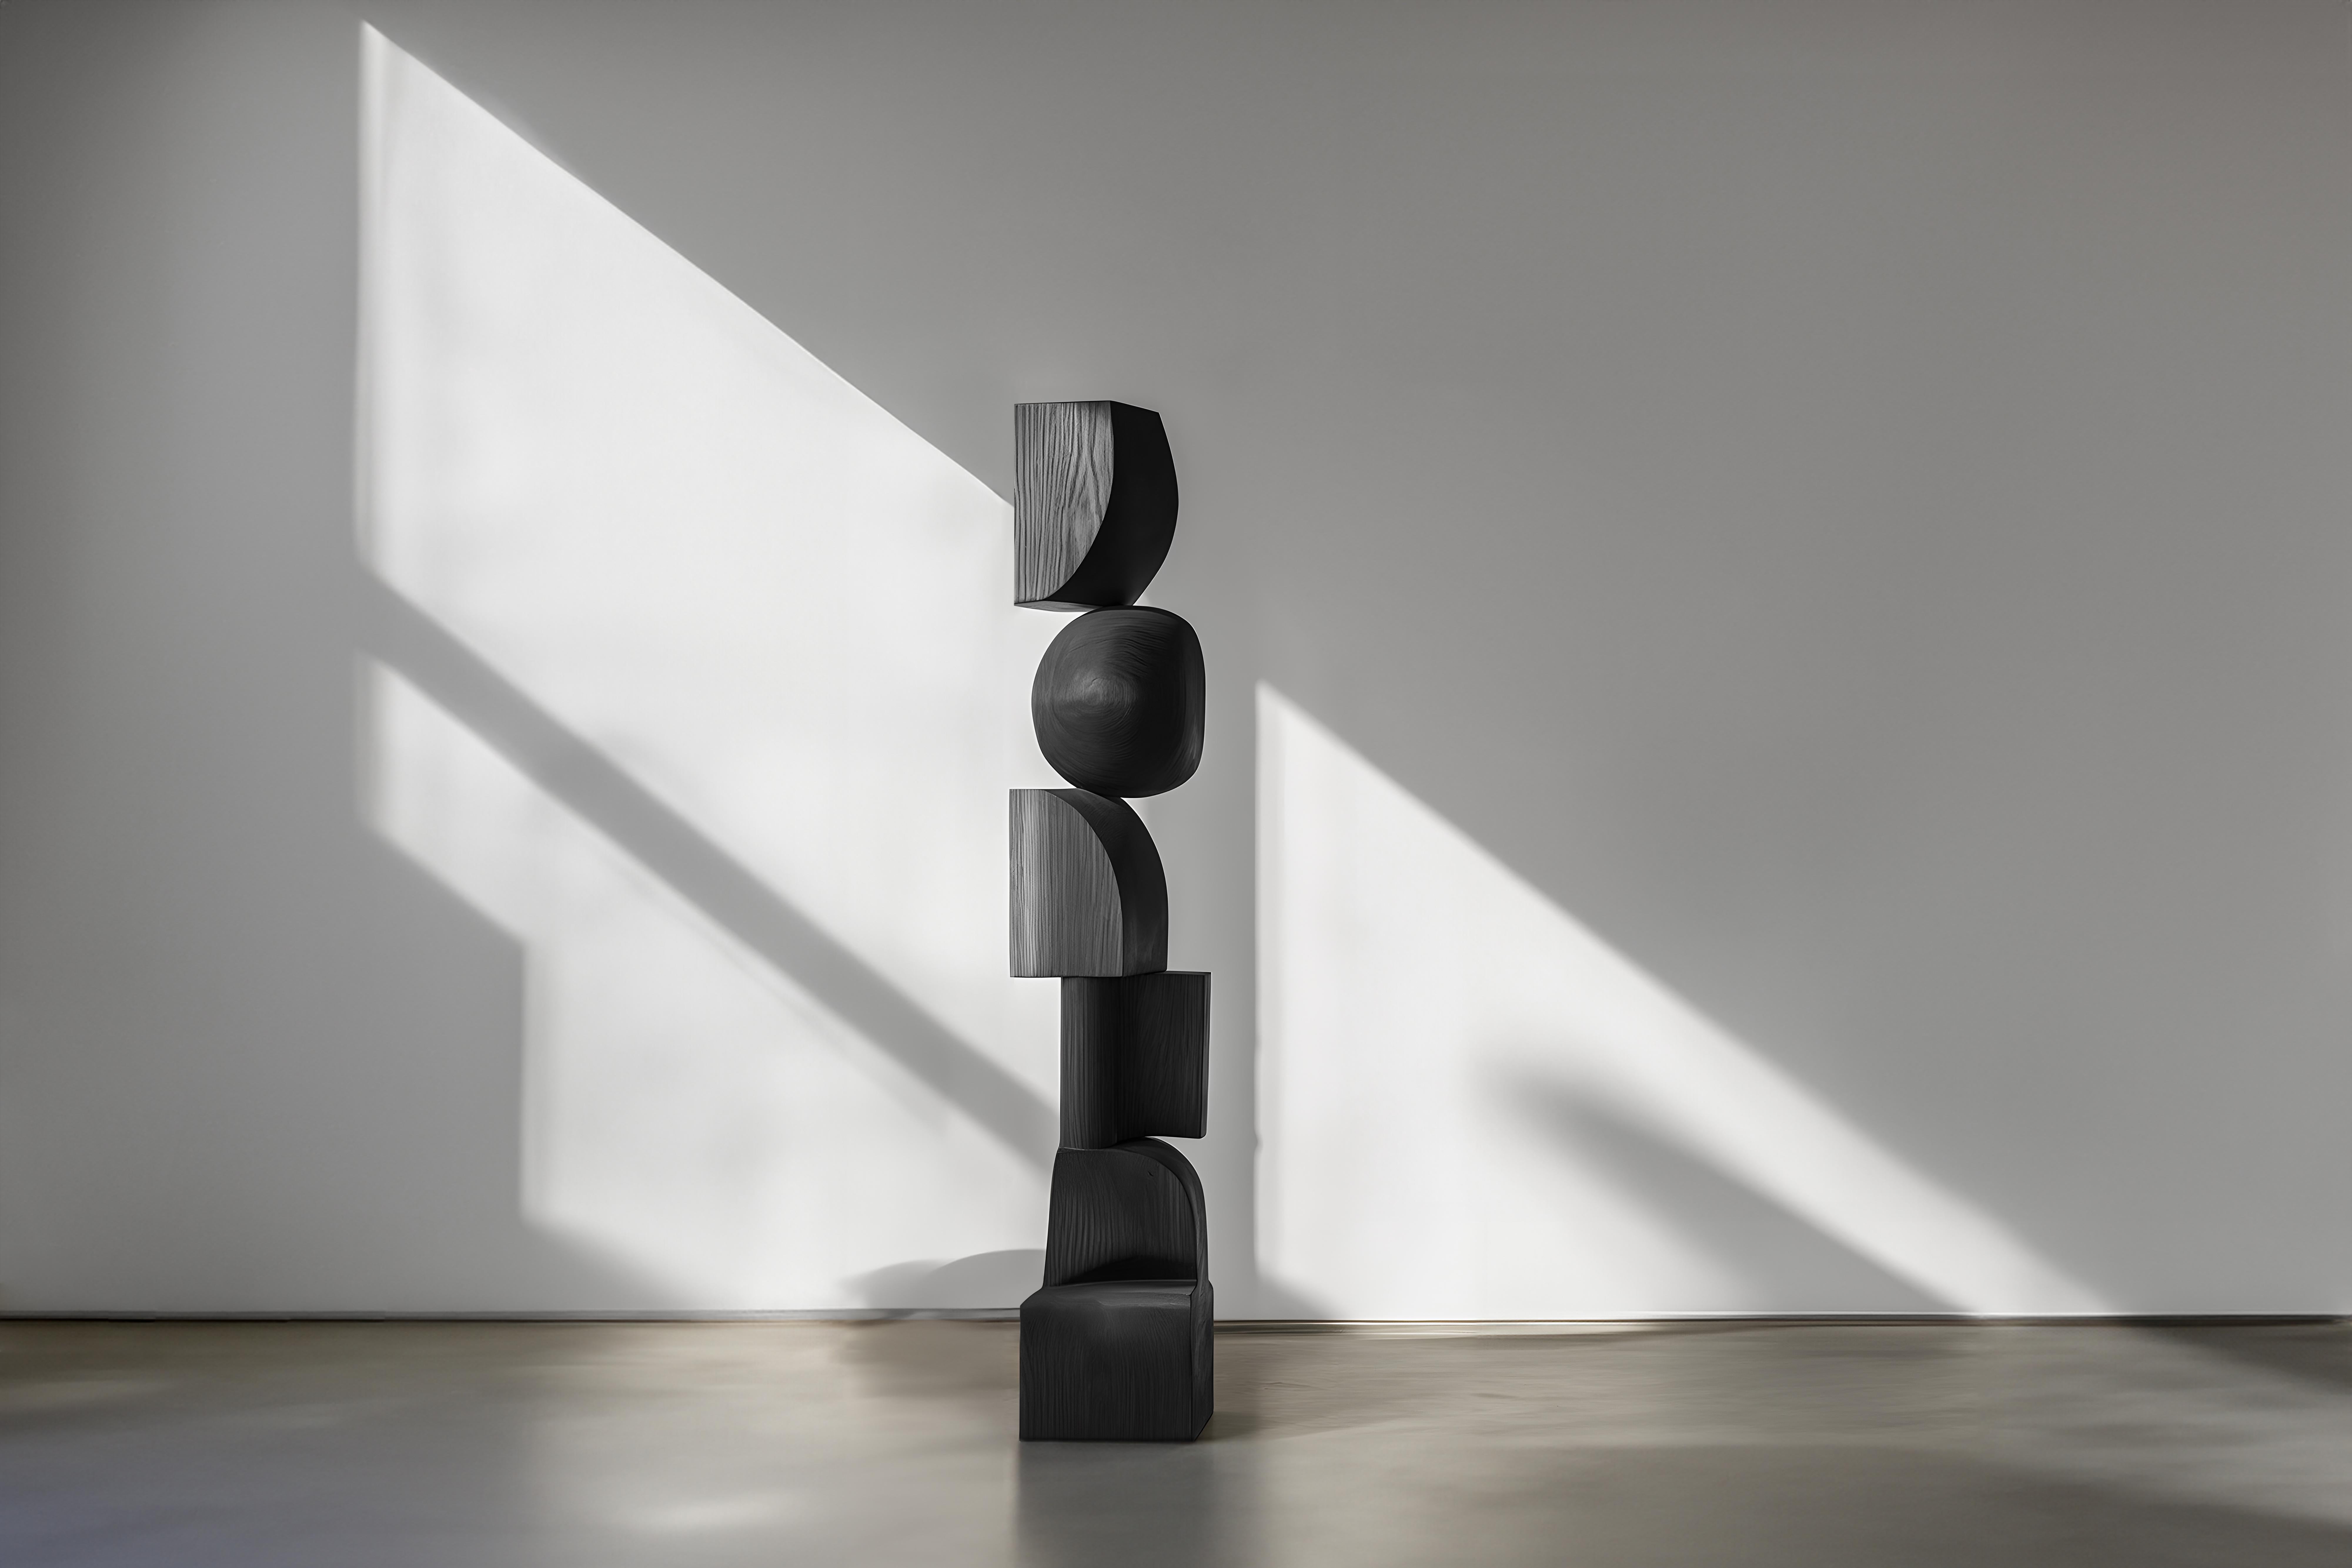 Elegant Biomorphic Sculpture, Black Solid Wood by Escalona, Still Stand No88
——

Joel Escalona's wooden standing sculptures are objects of raw beauty and serene grace. Each one is a testament to the power of the material, with smooth curves that